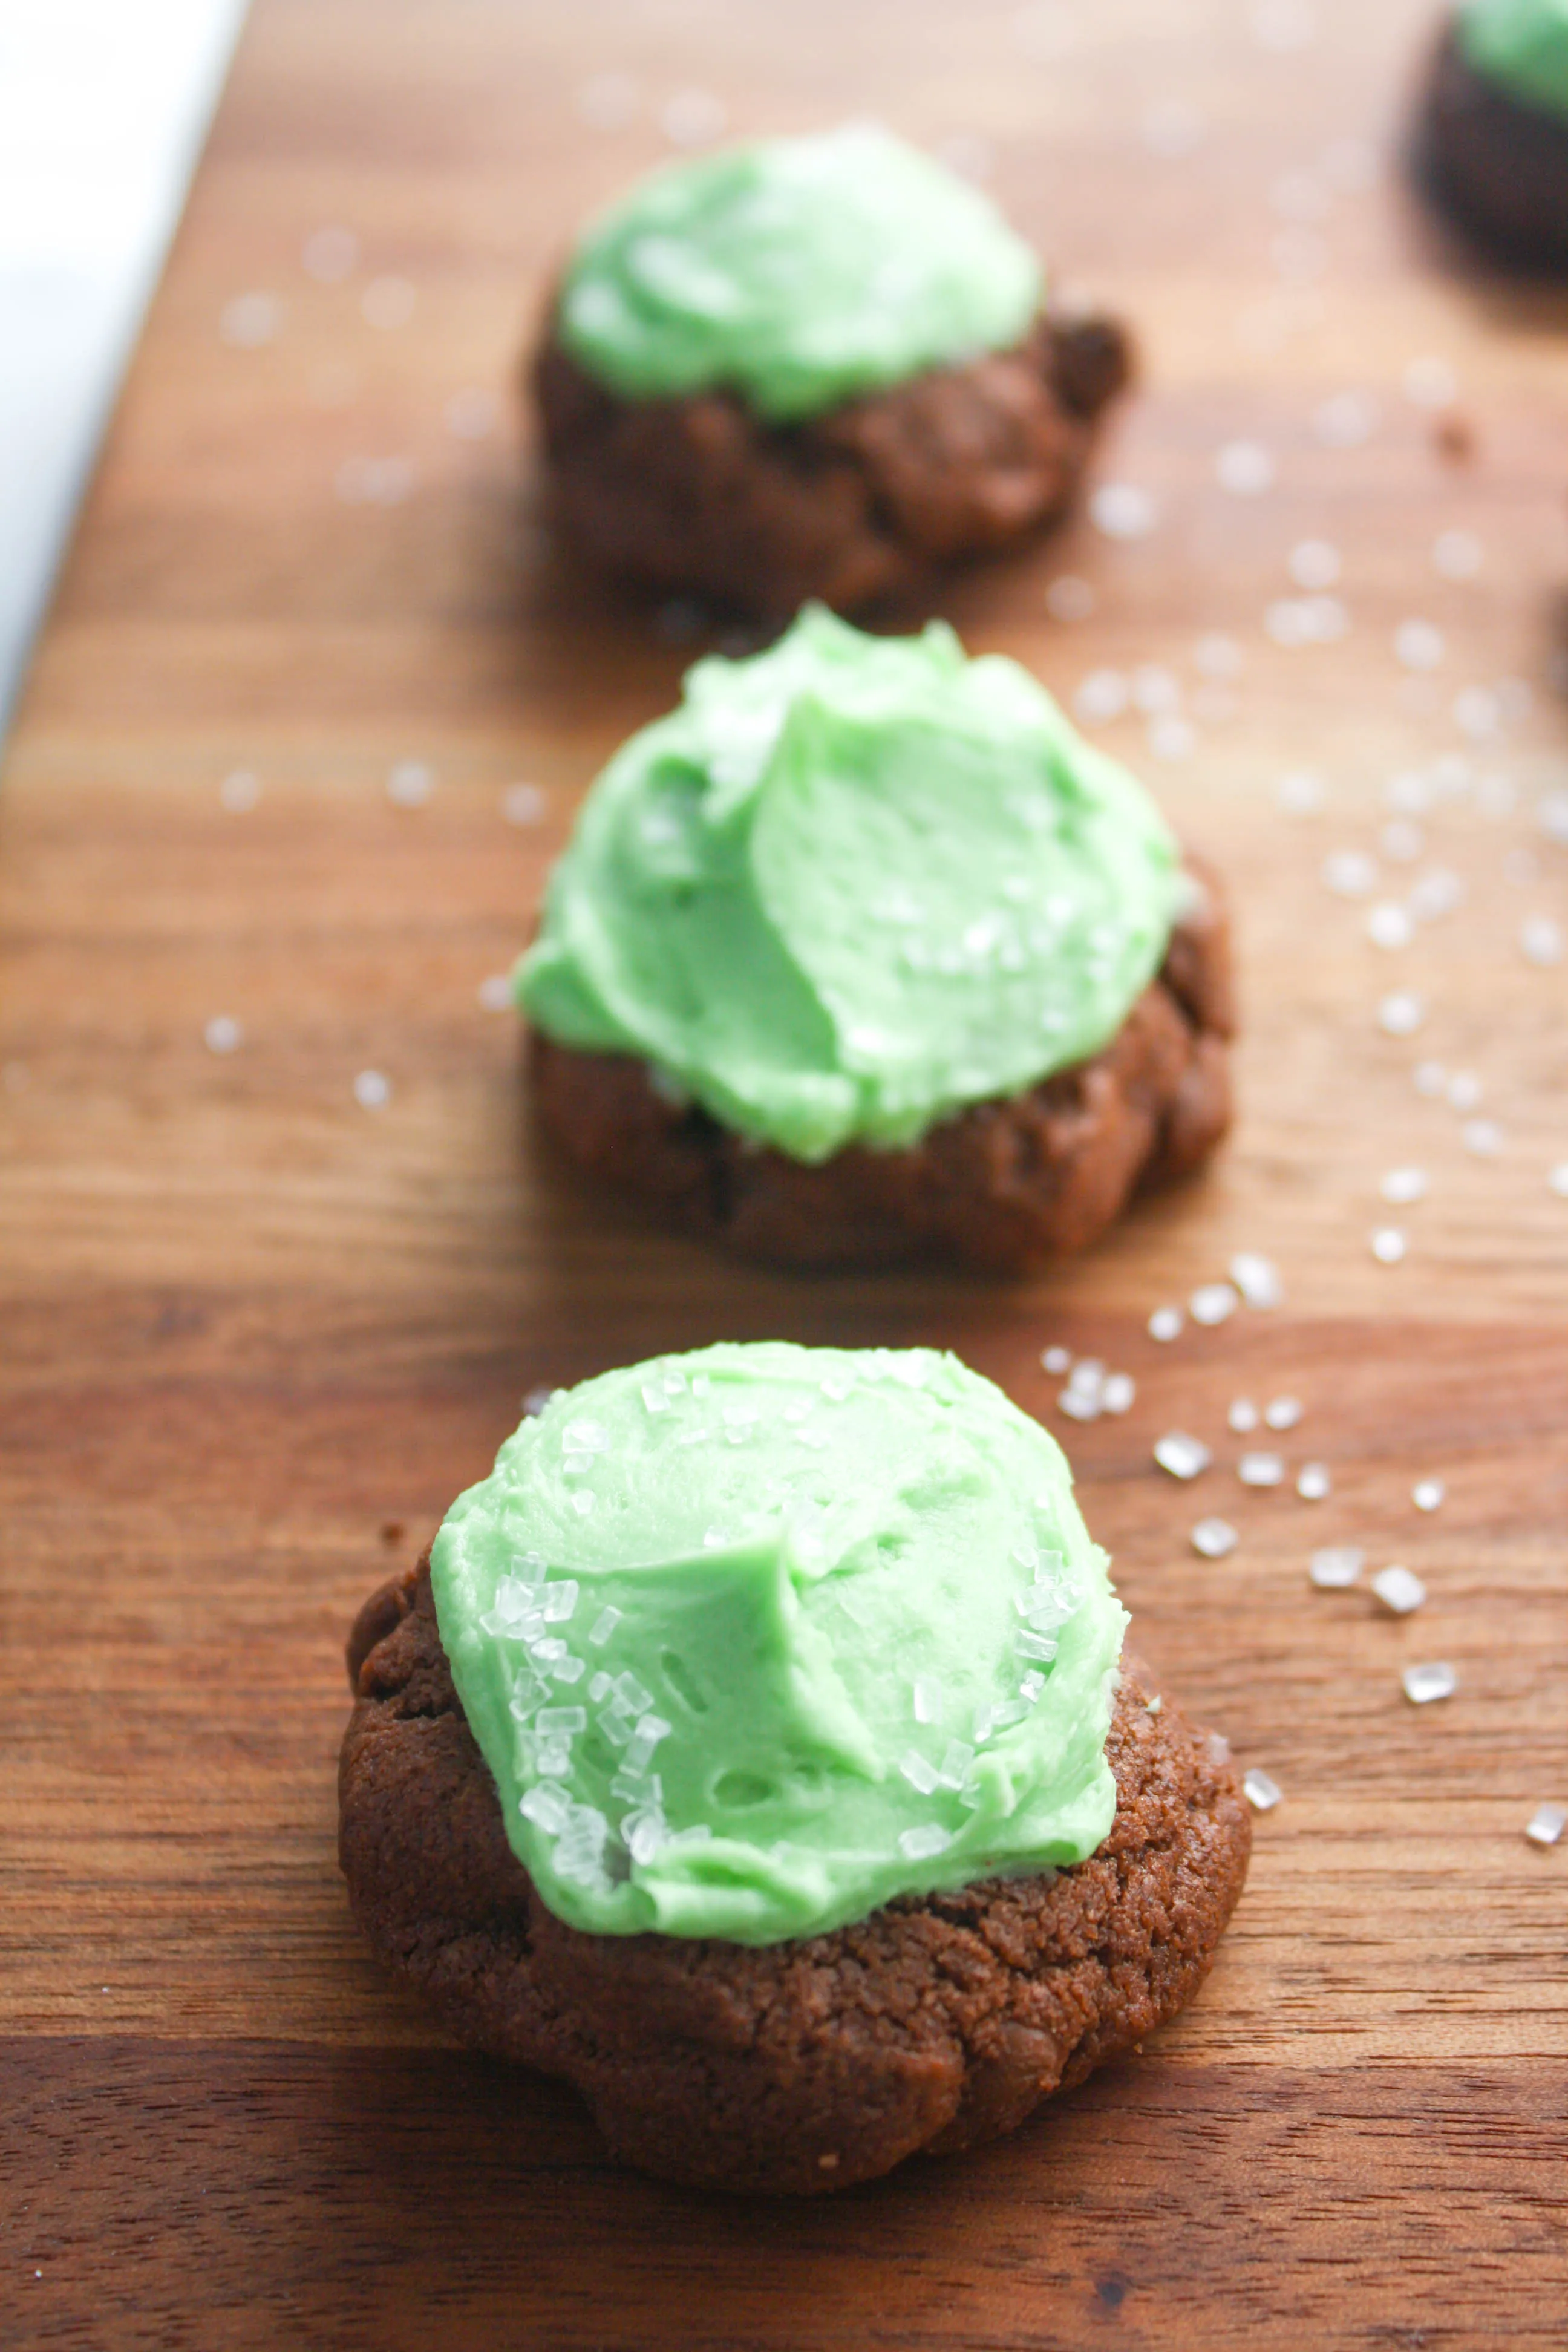 Double Chocolate Cookies with Baileys Buttercream Frosting make a fun dessert! You'll love these double chocolate cookies just in time for St. Patrick's Day!